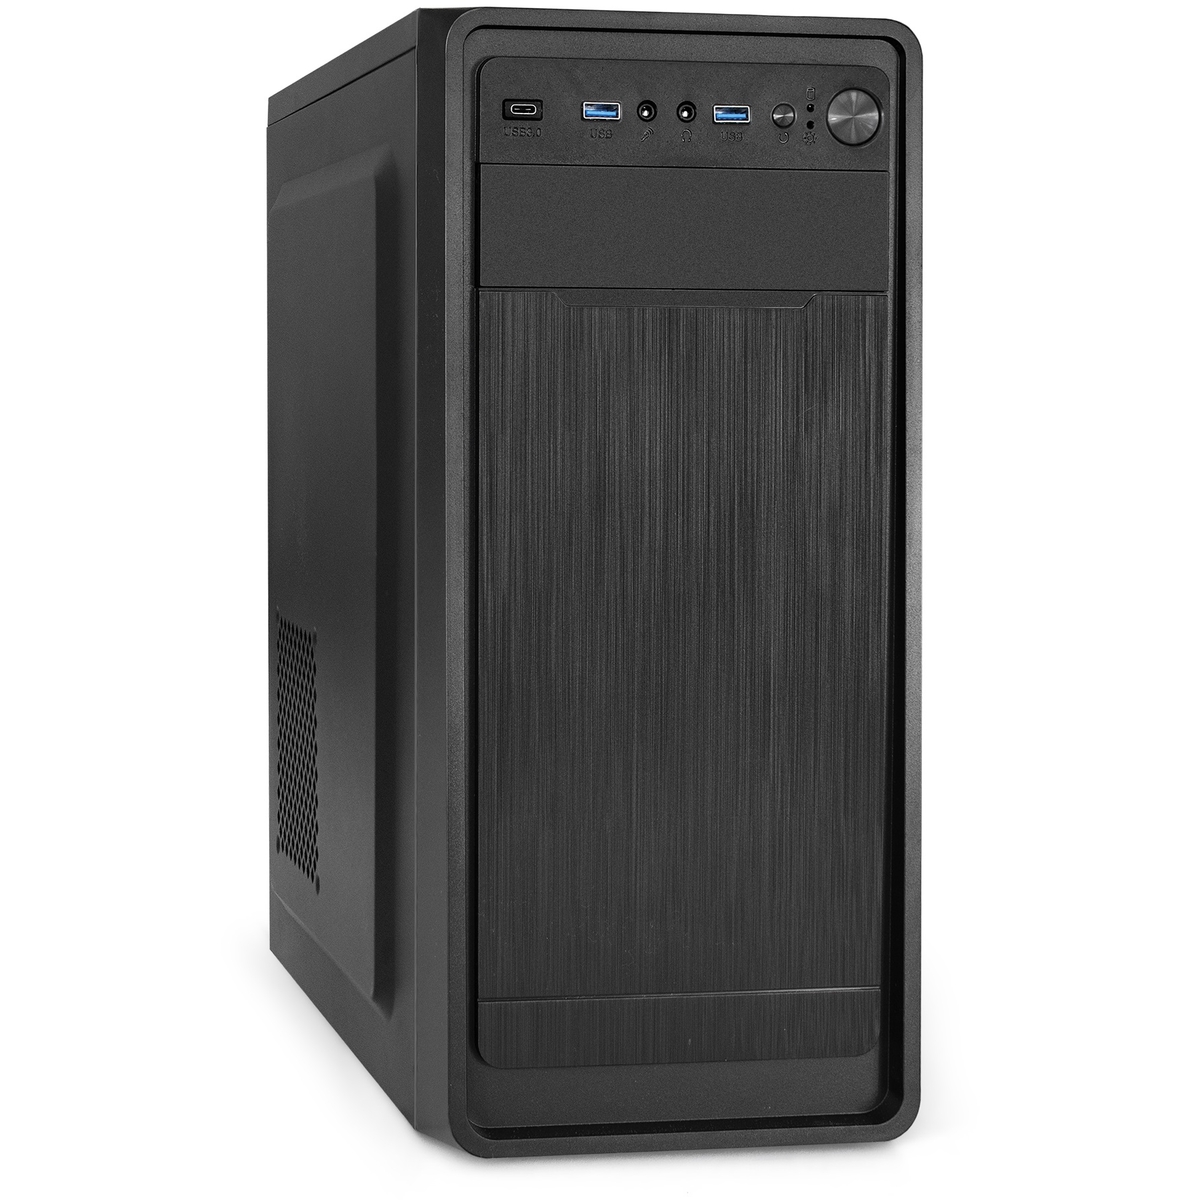 Miditower ExeGate XP-332UC-XP400